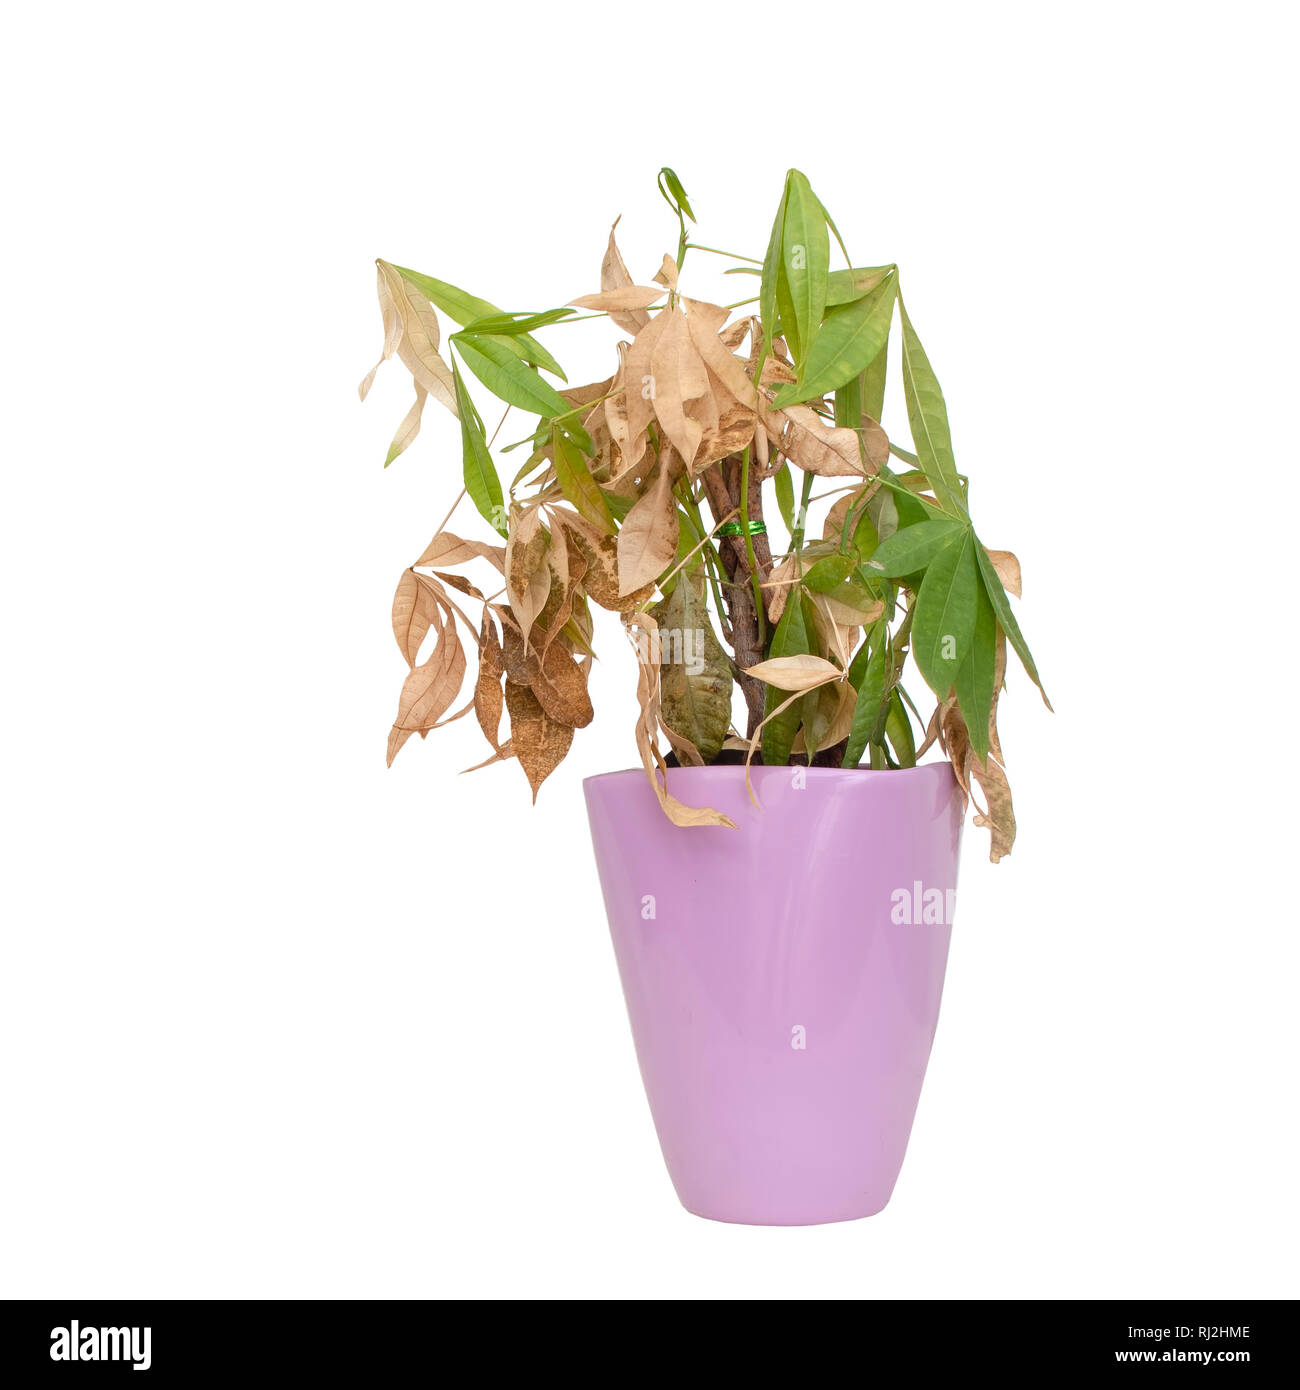 Dead and dry houseplant in pretty purple pot isolated on white background. It was Pachira aquatica, aka Money Tree. Stock Photo